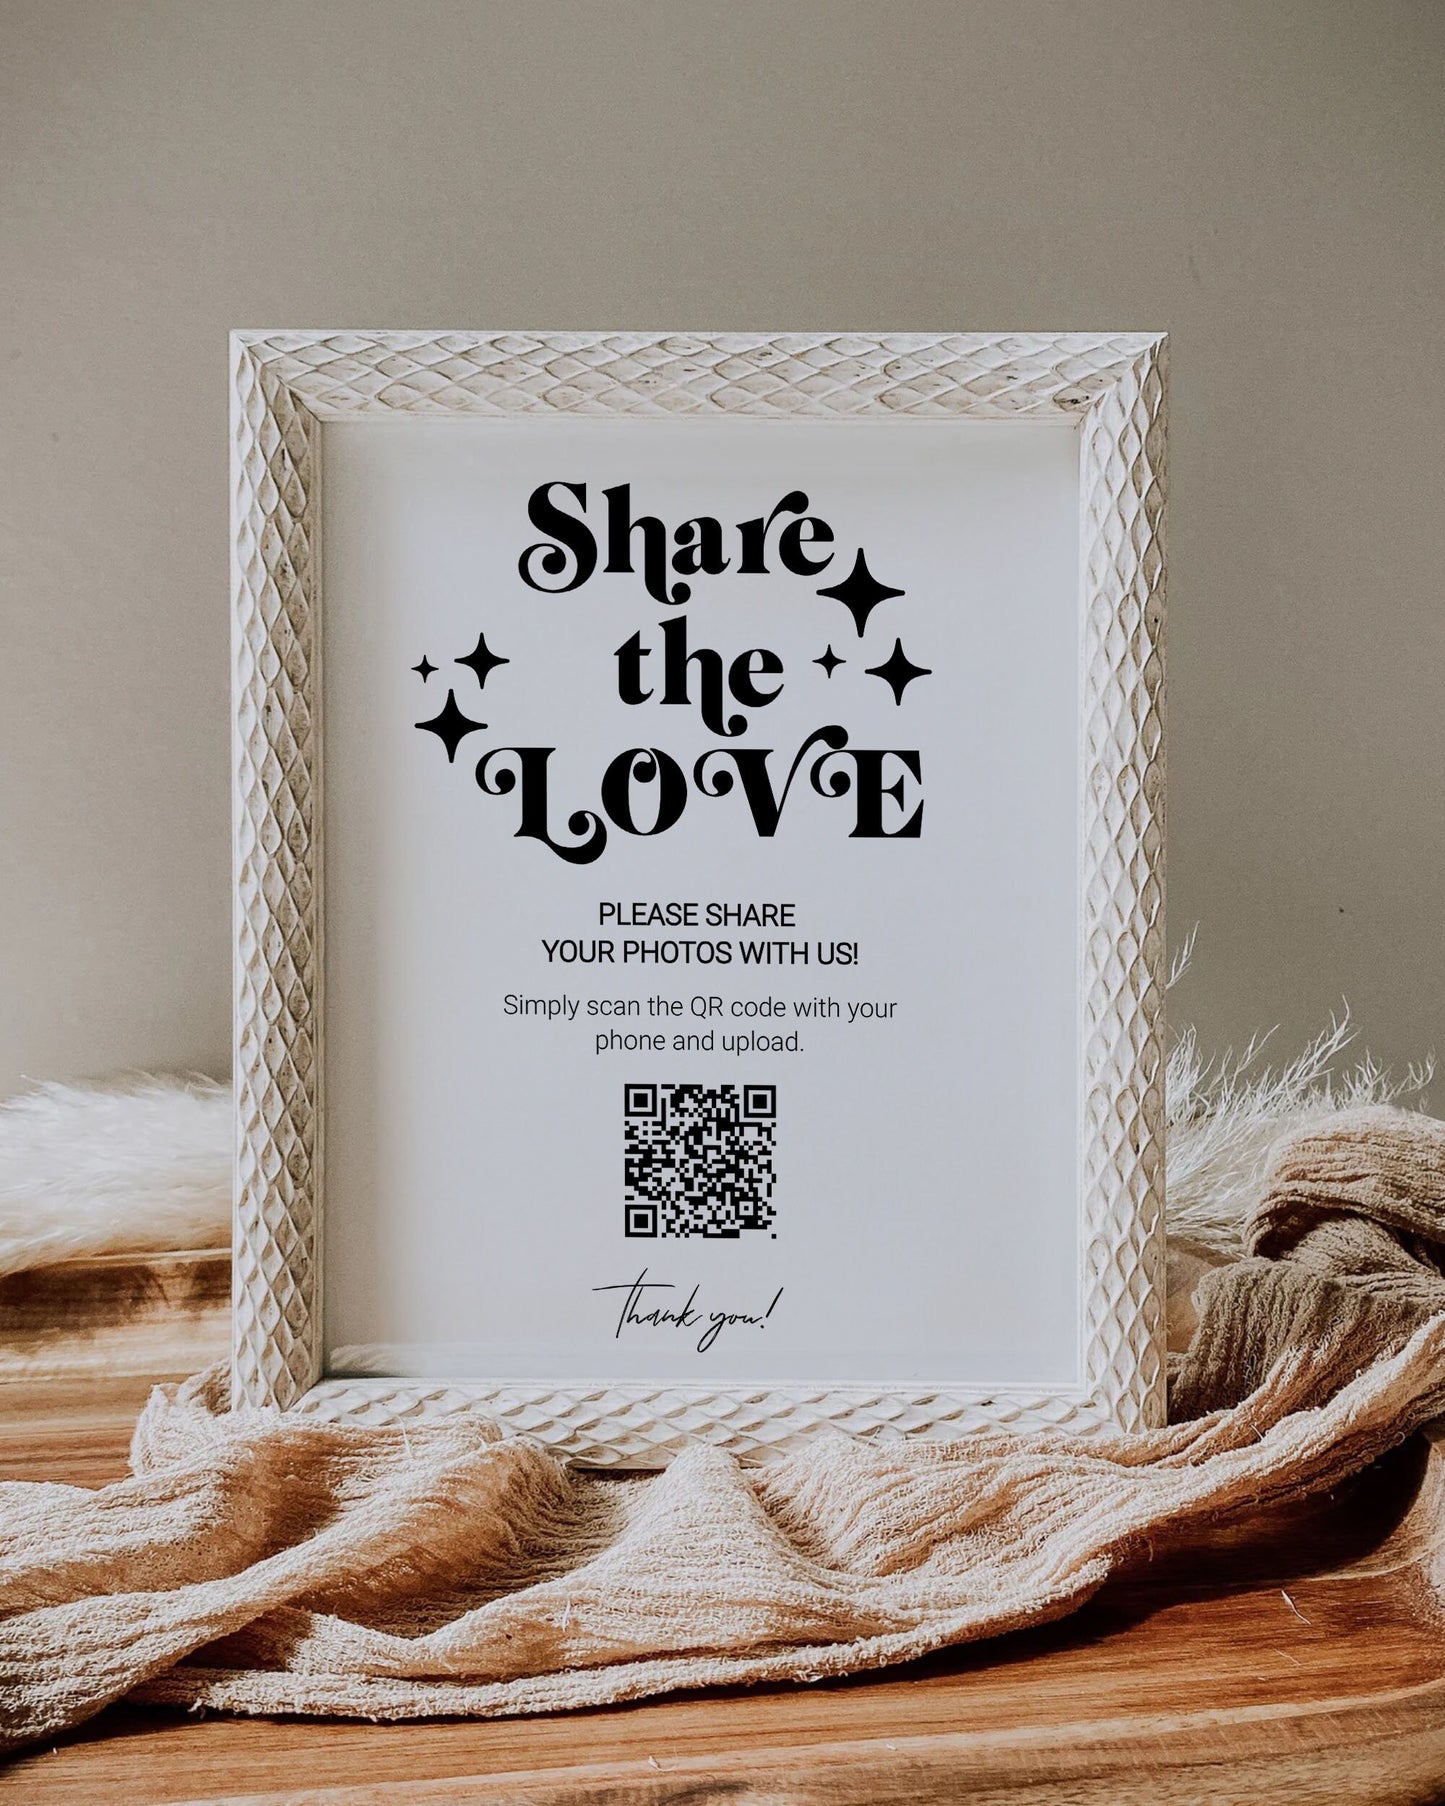 QR Code Sign "Share the Love" for 70s themed retro Wedding | Capture the Love | Share Photos Wedding Decor Sign | Printable Template #065b